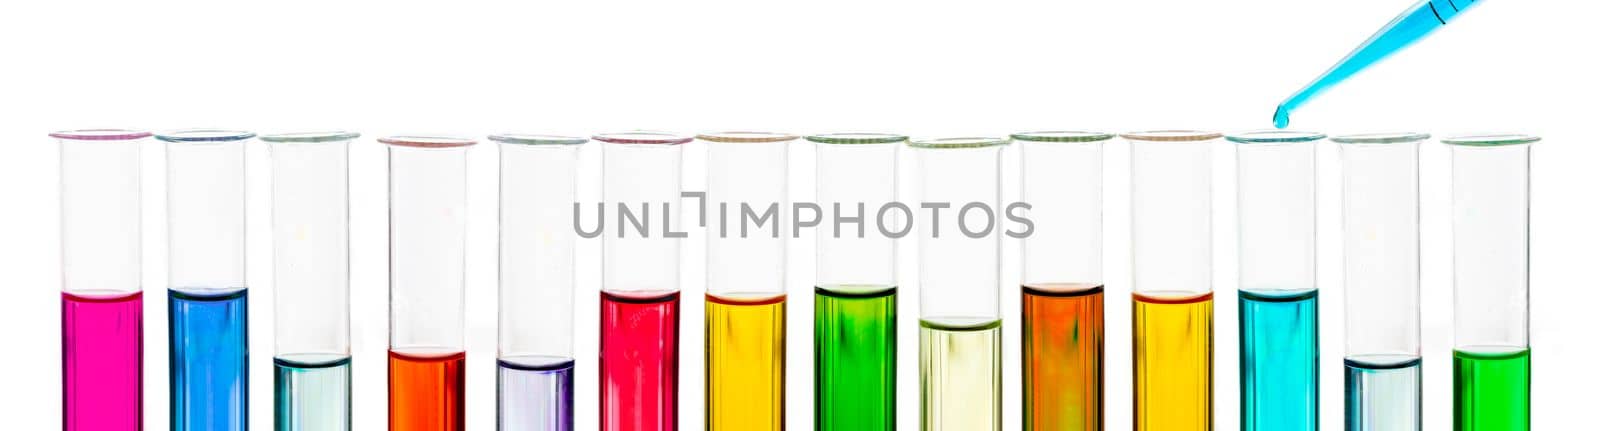 panoramic image-Glass laboratory equipment for science research on white background by JPC-PROD